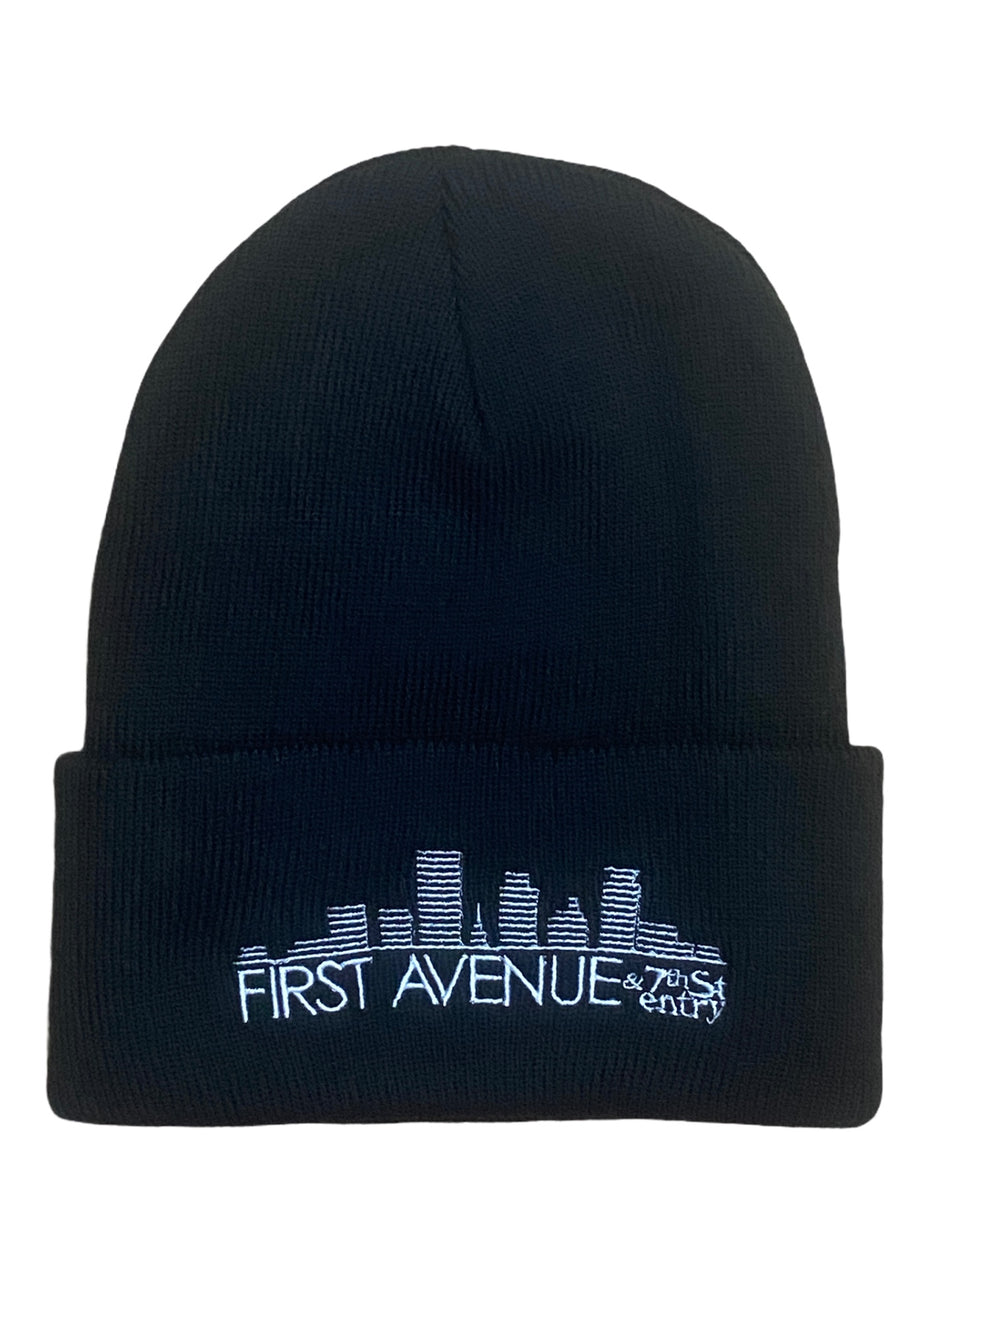 Prince – First Avenue Skyline Official T UP Beanie Hat Embroidery Brand New Prince